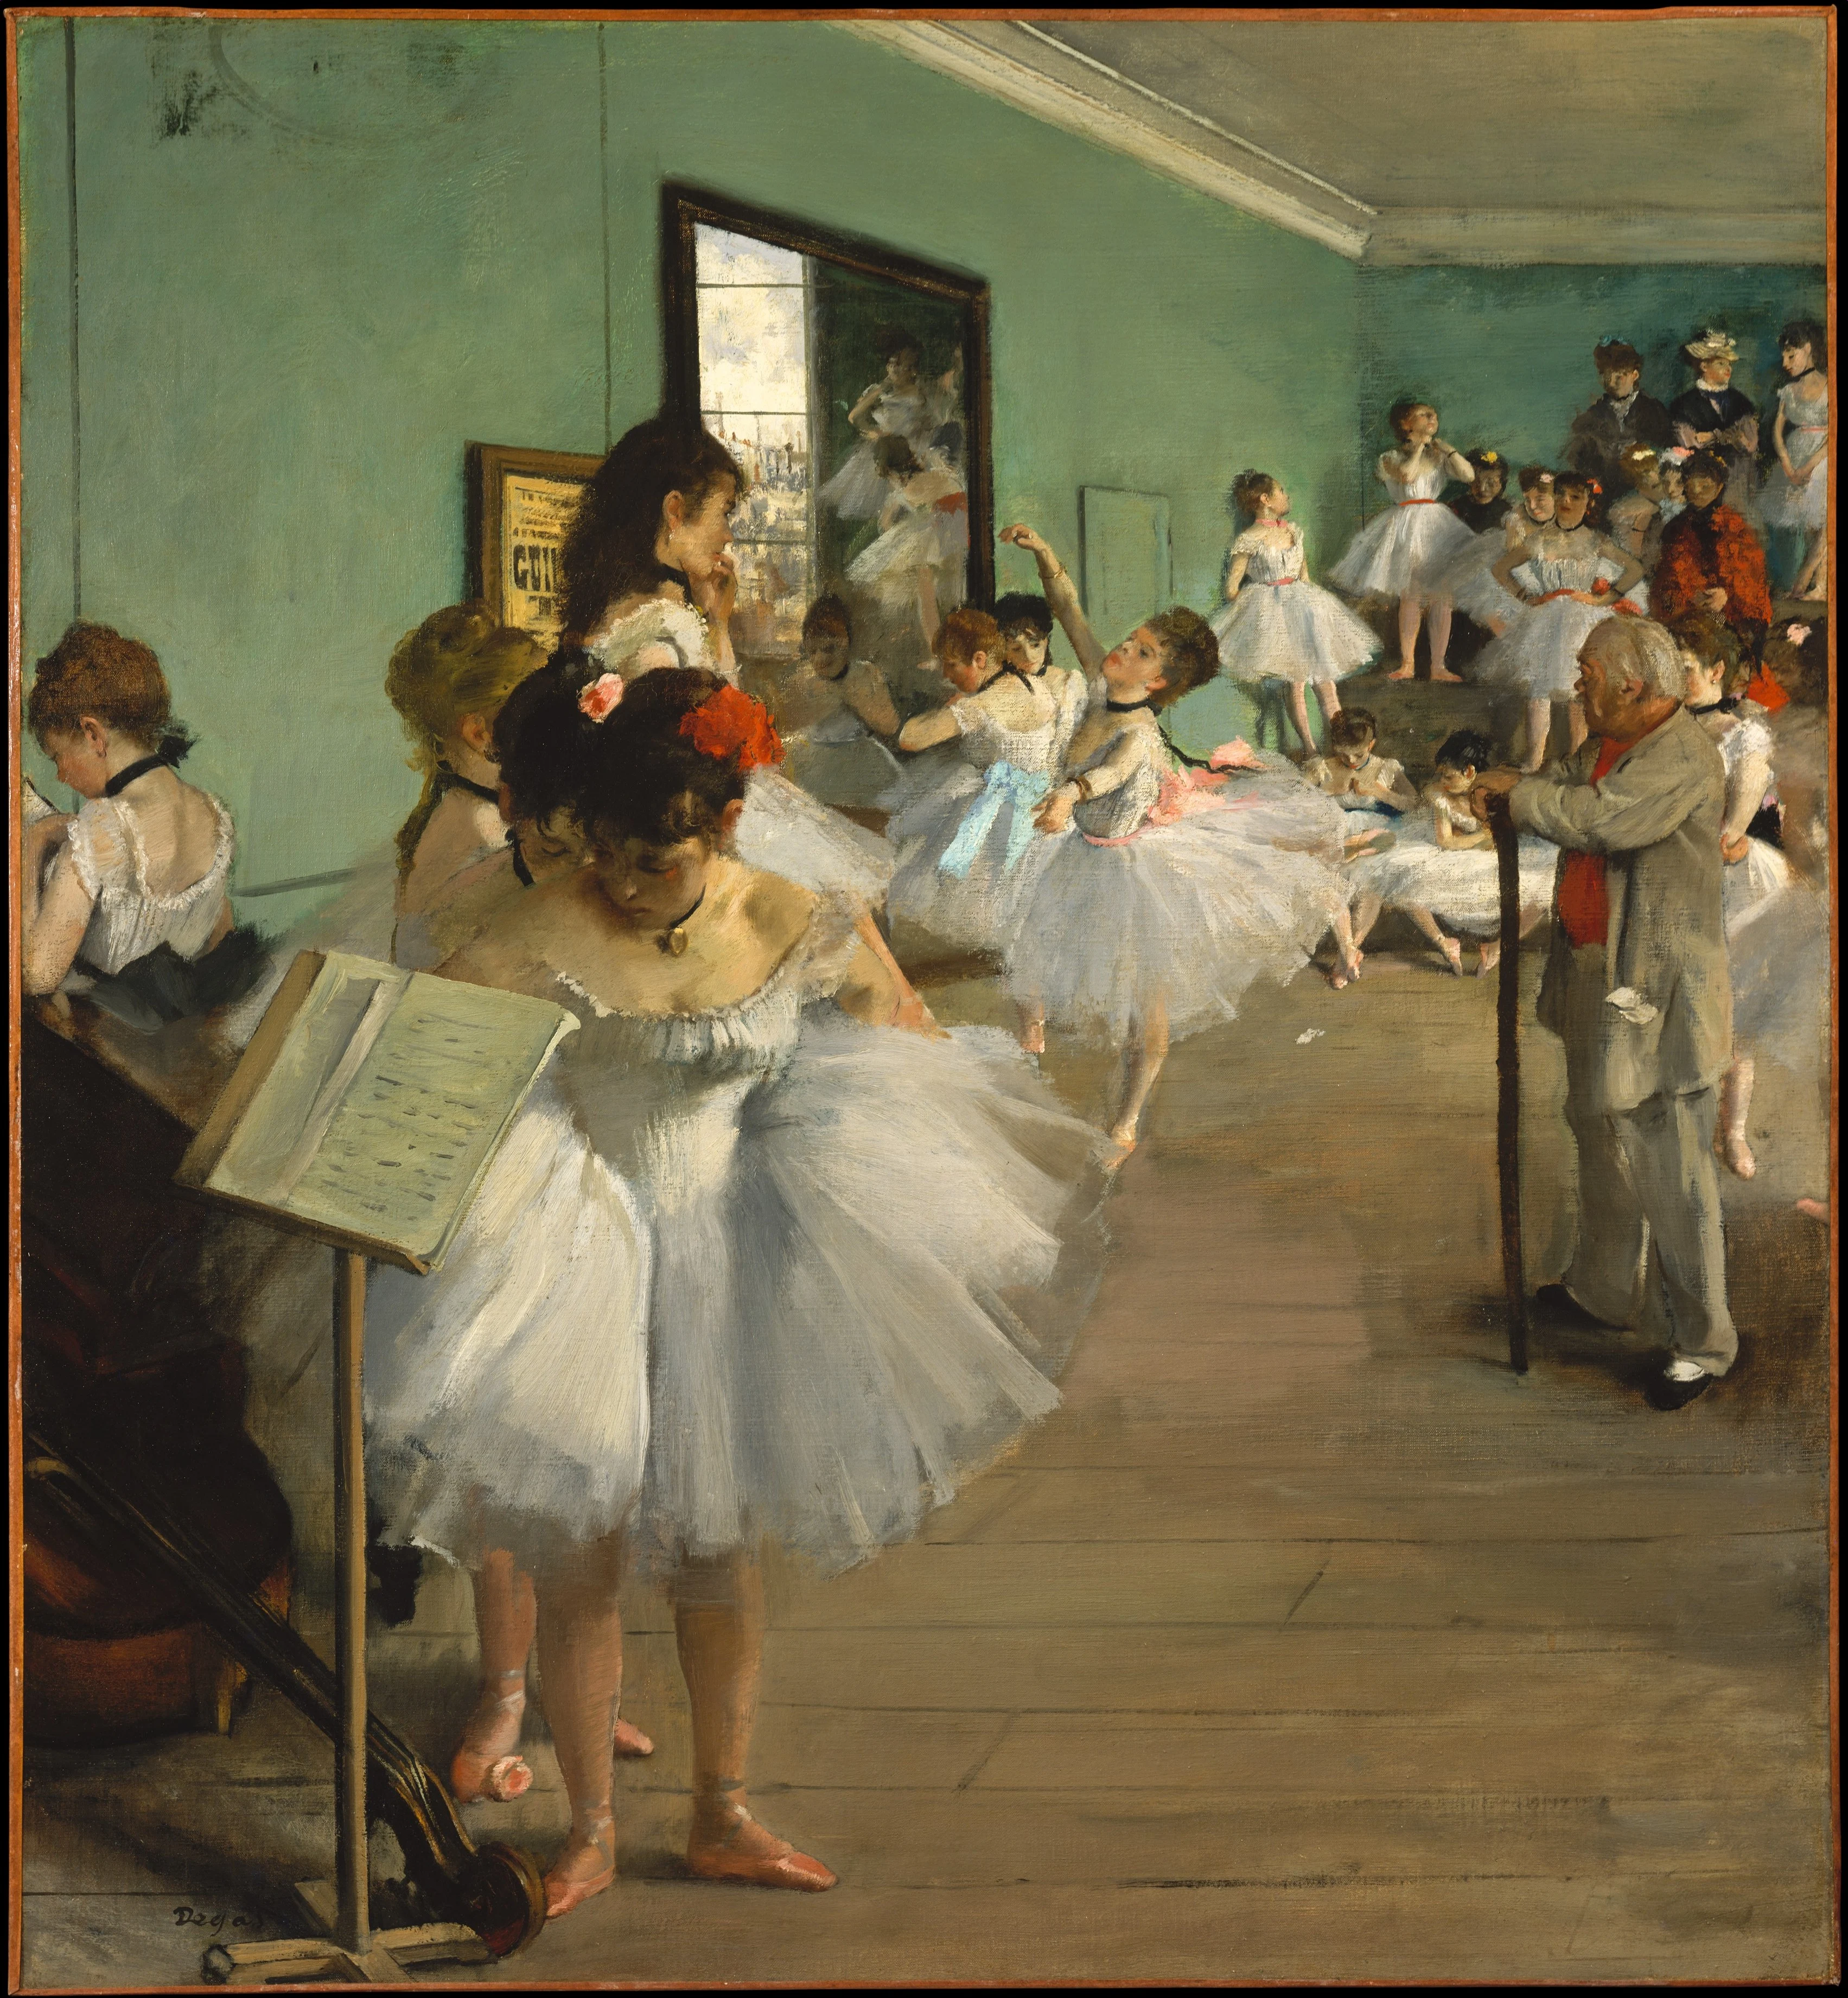 Image of painting by Degas showing students in a ballet class